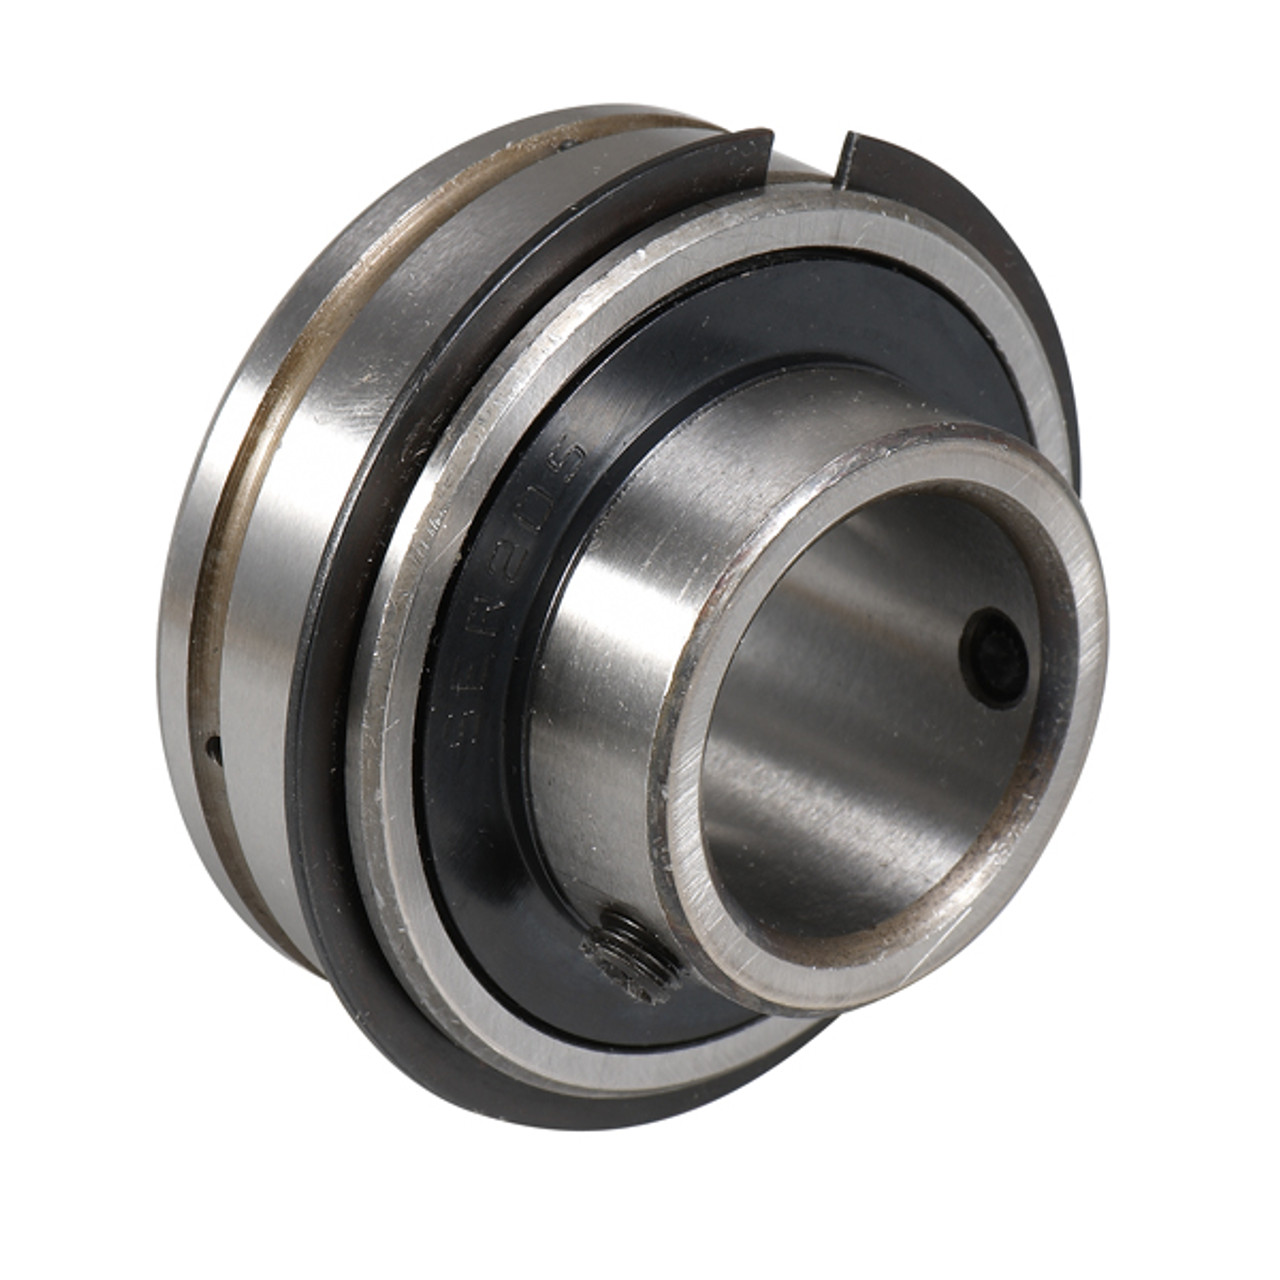 SER210 GENERIC 50mm Normal duty bearing insert with a parallel outer race and grubscrew locking - Metric Thumbnail